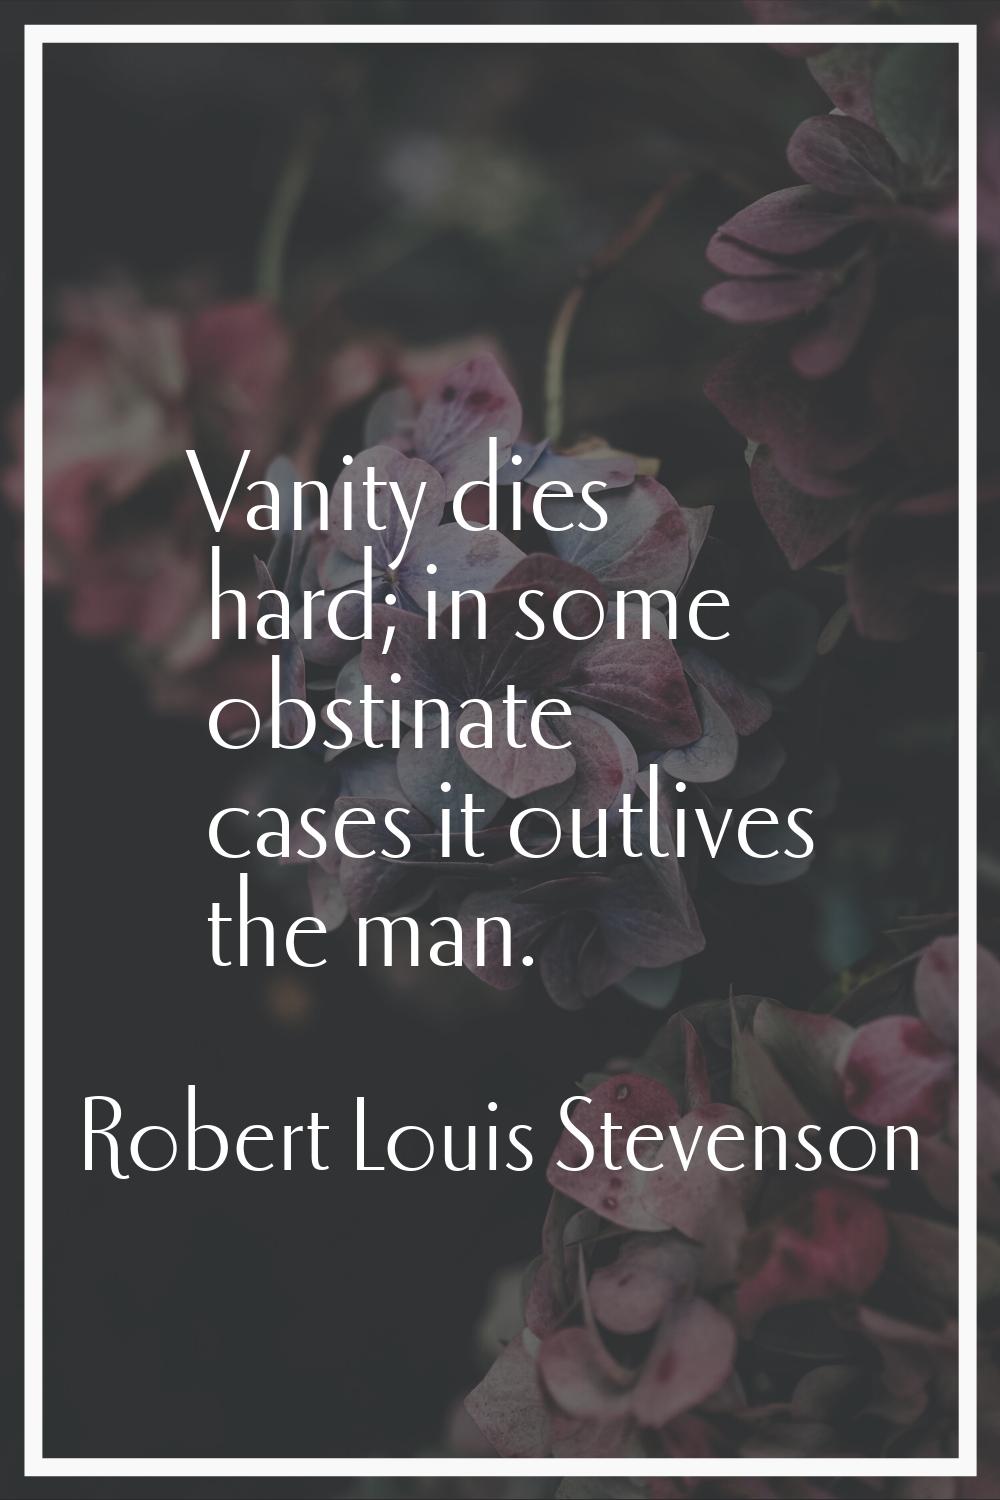 Vanity dies hard; in some obstinate cases it outlives the man.